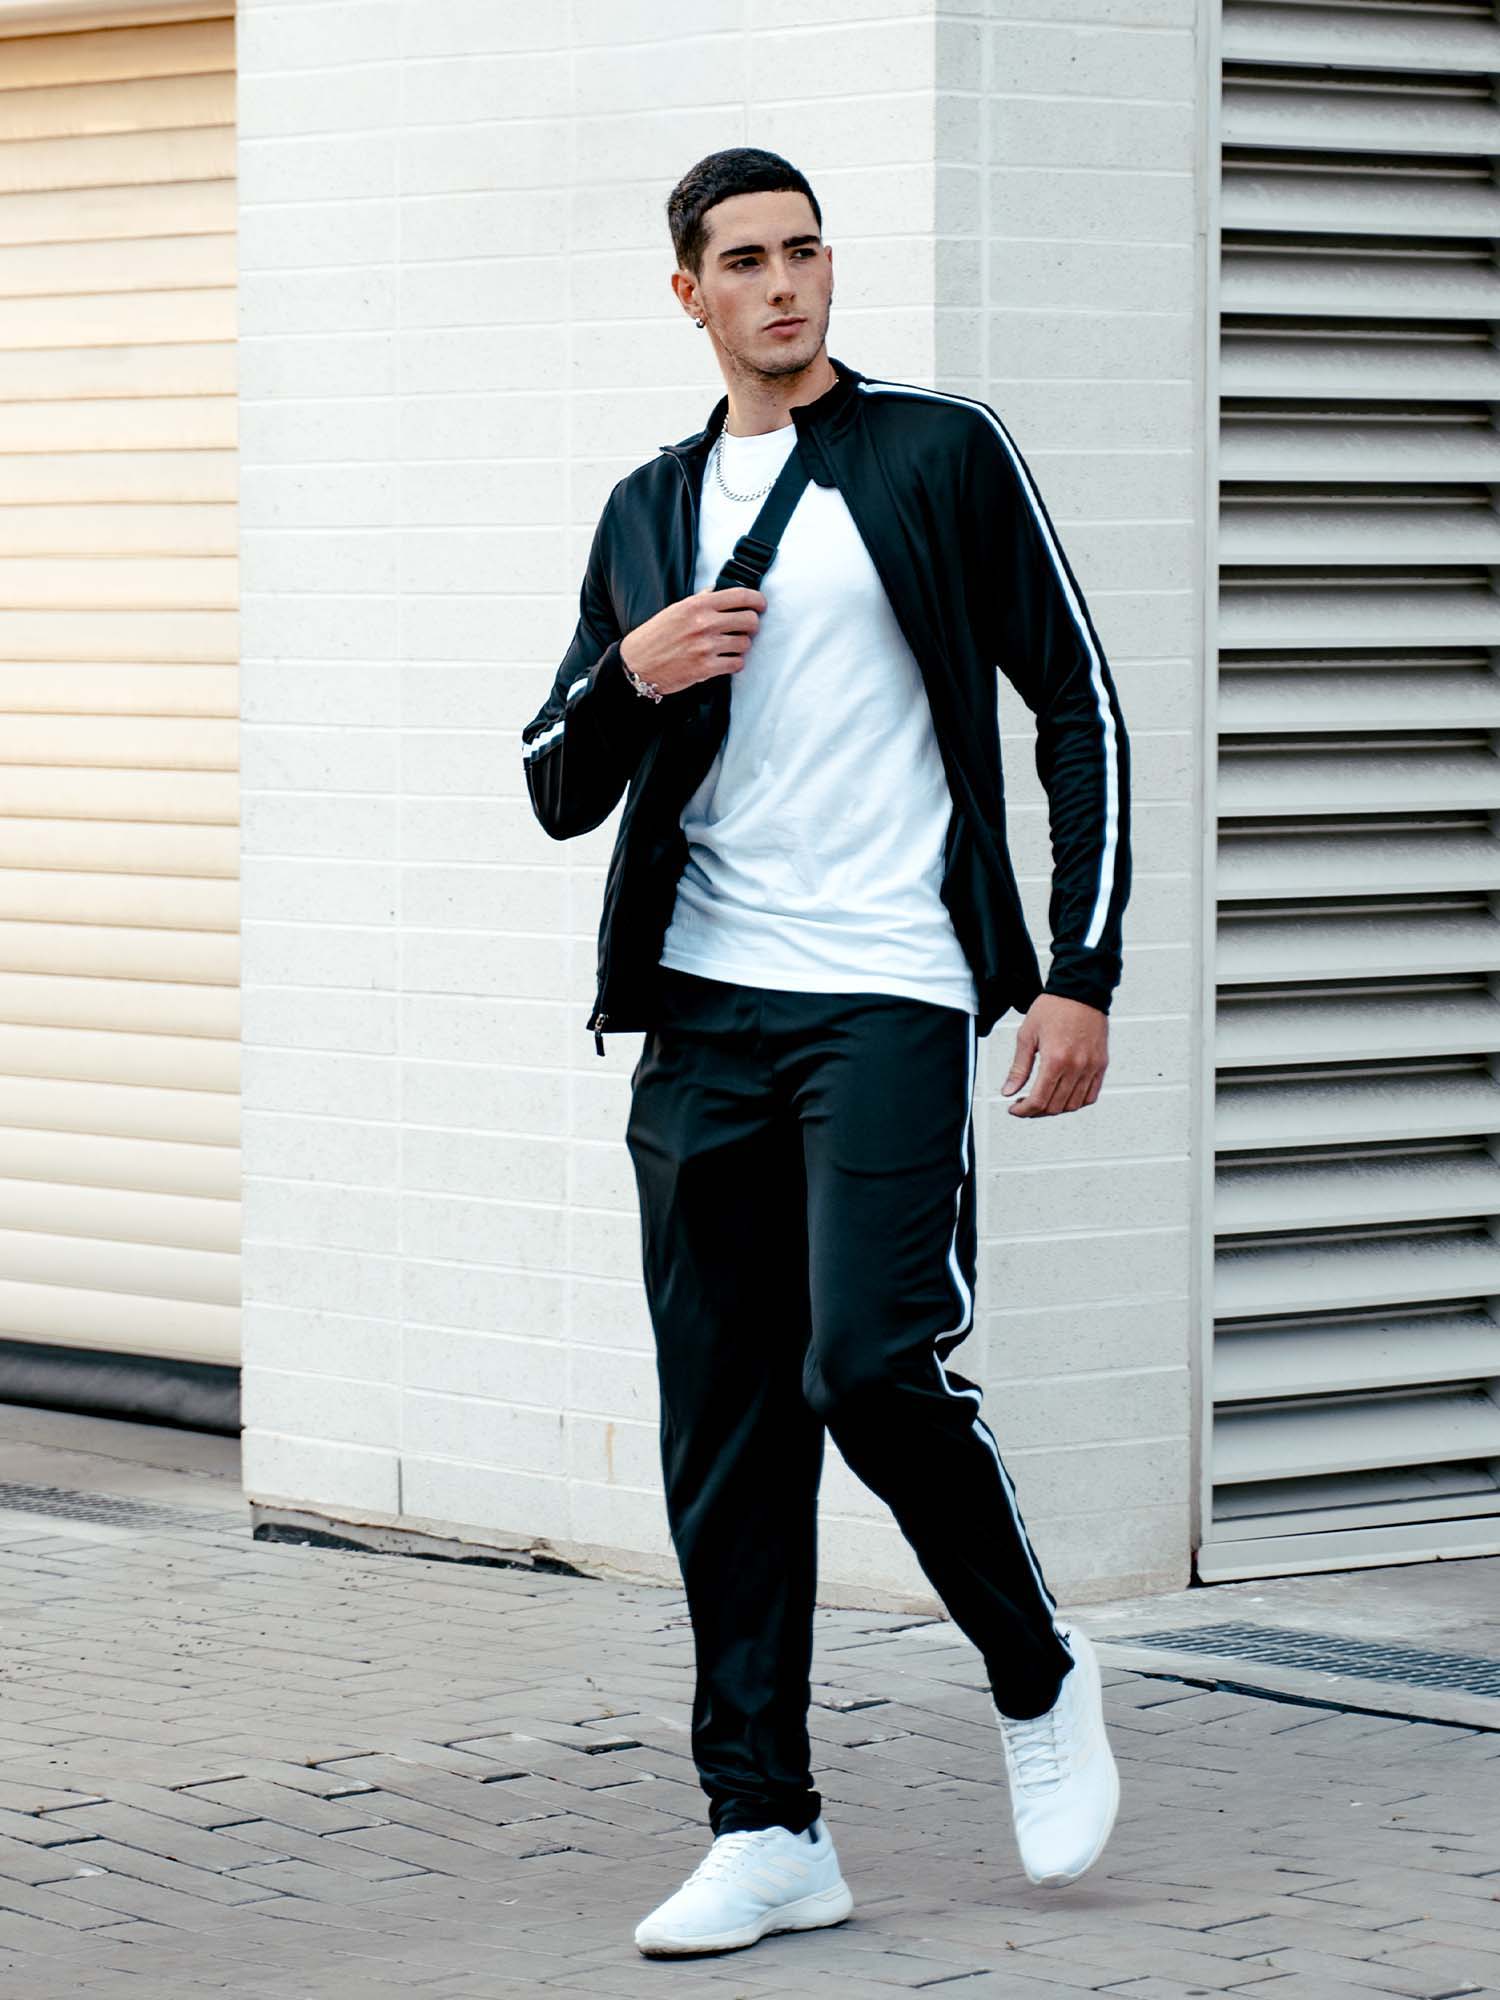 Tall man walking outside wearing a black athletic jacket and pants with a white stripe down the side.